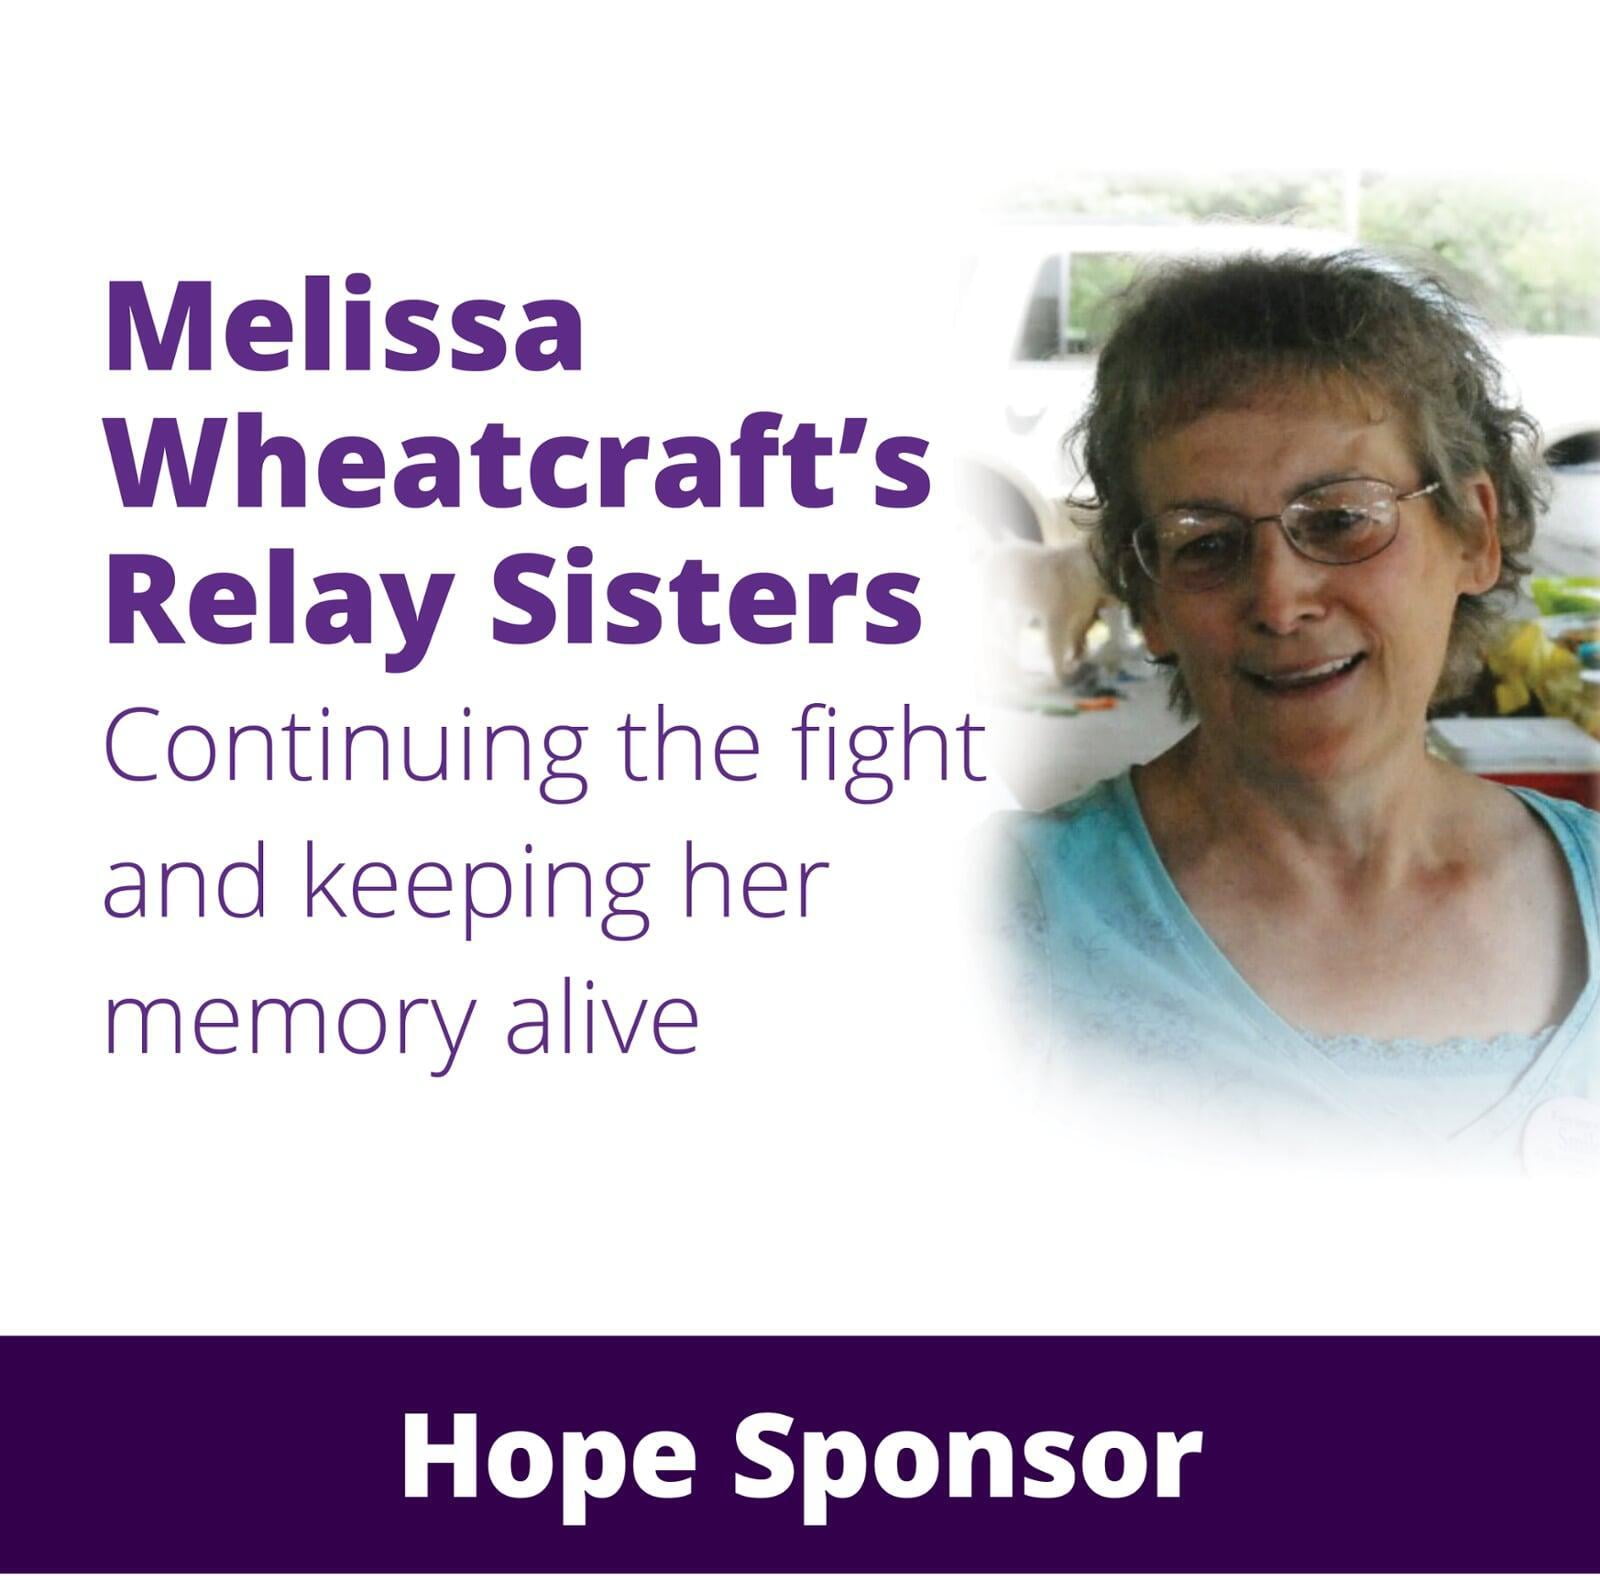 Melissa Wheatcraft's Relay Sisters and a photo of Melissa Wheatcraft